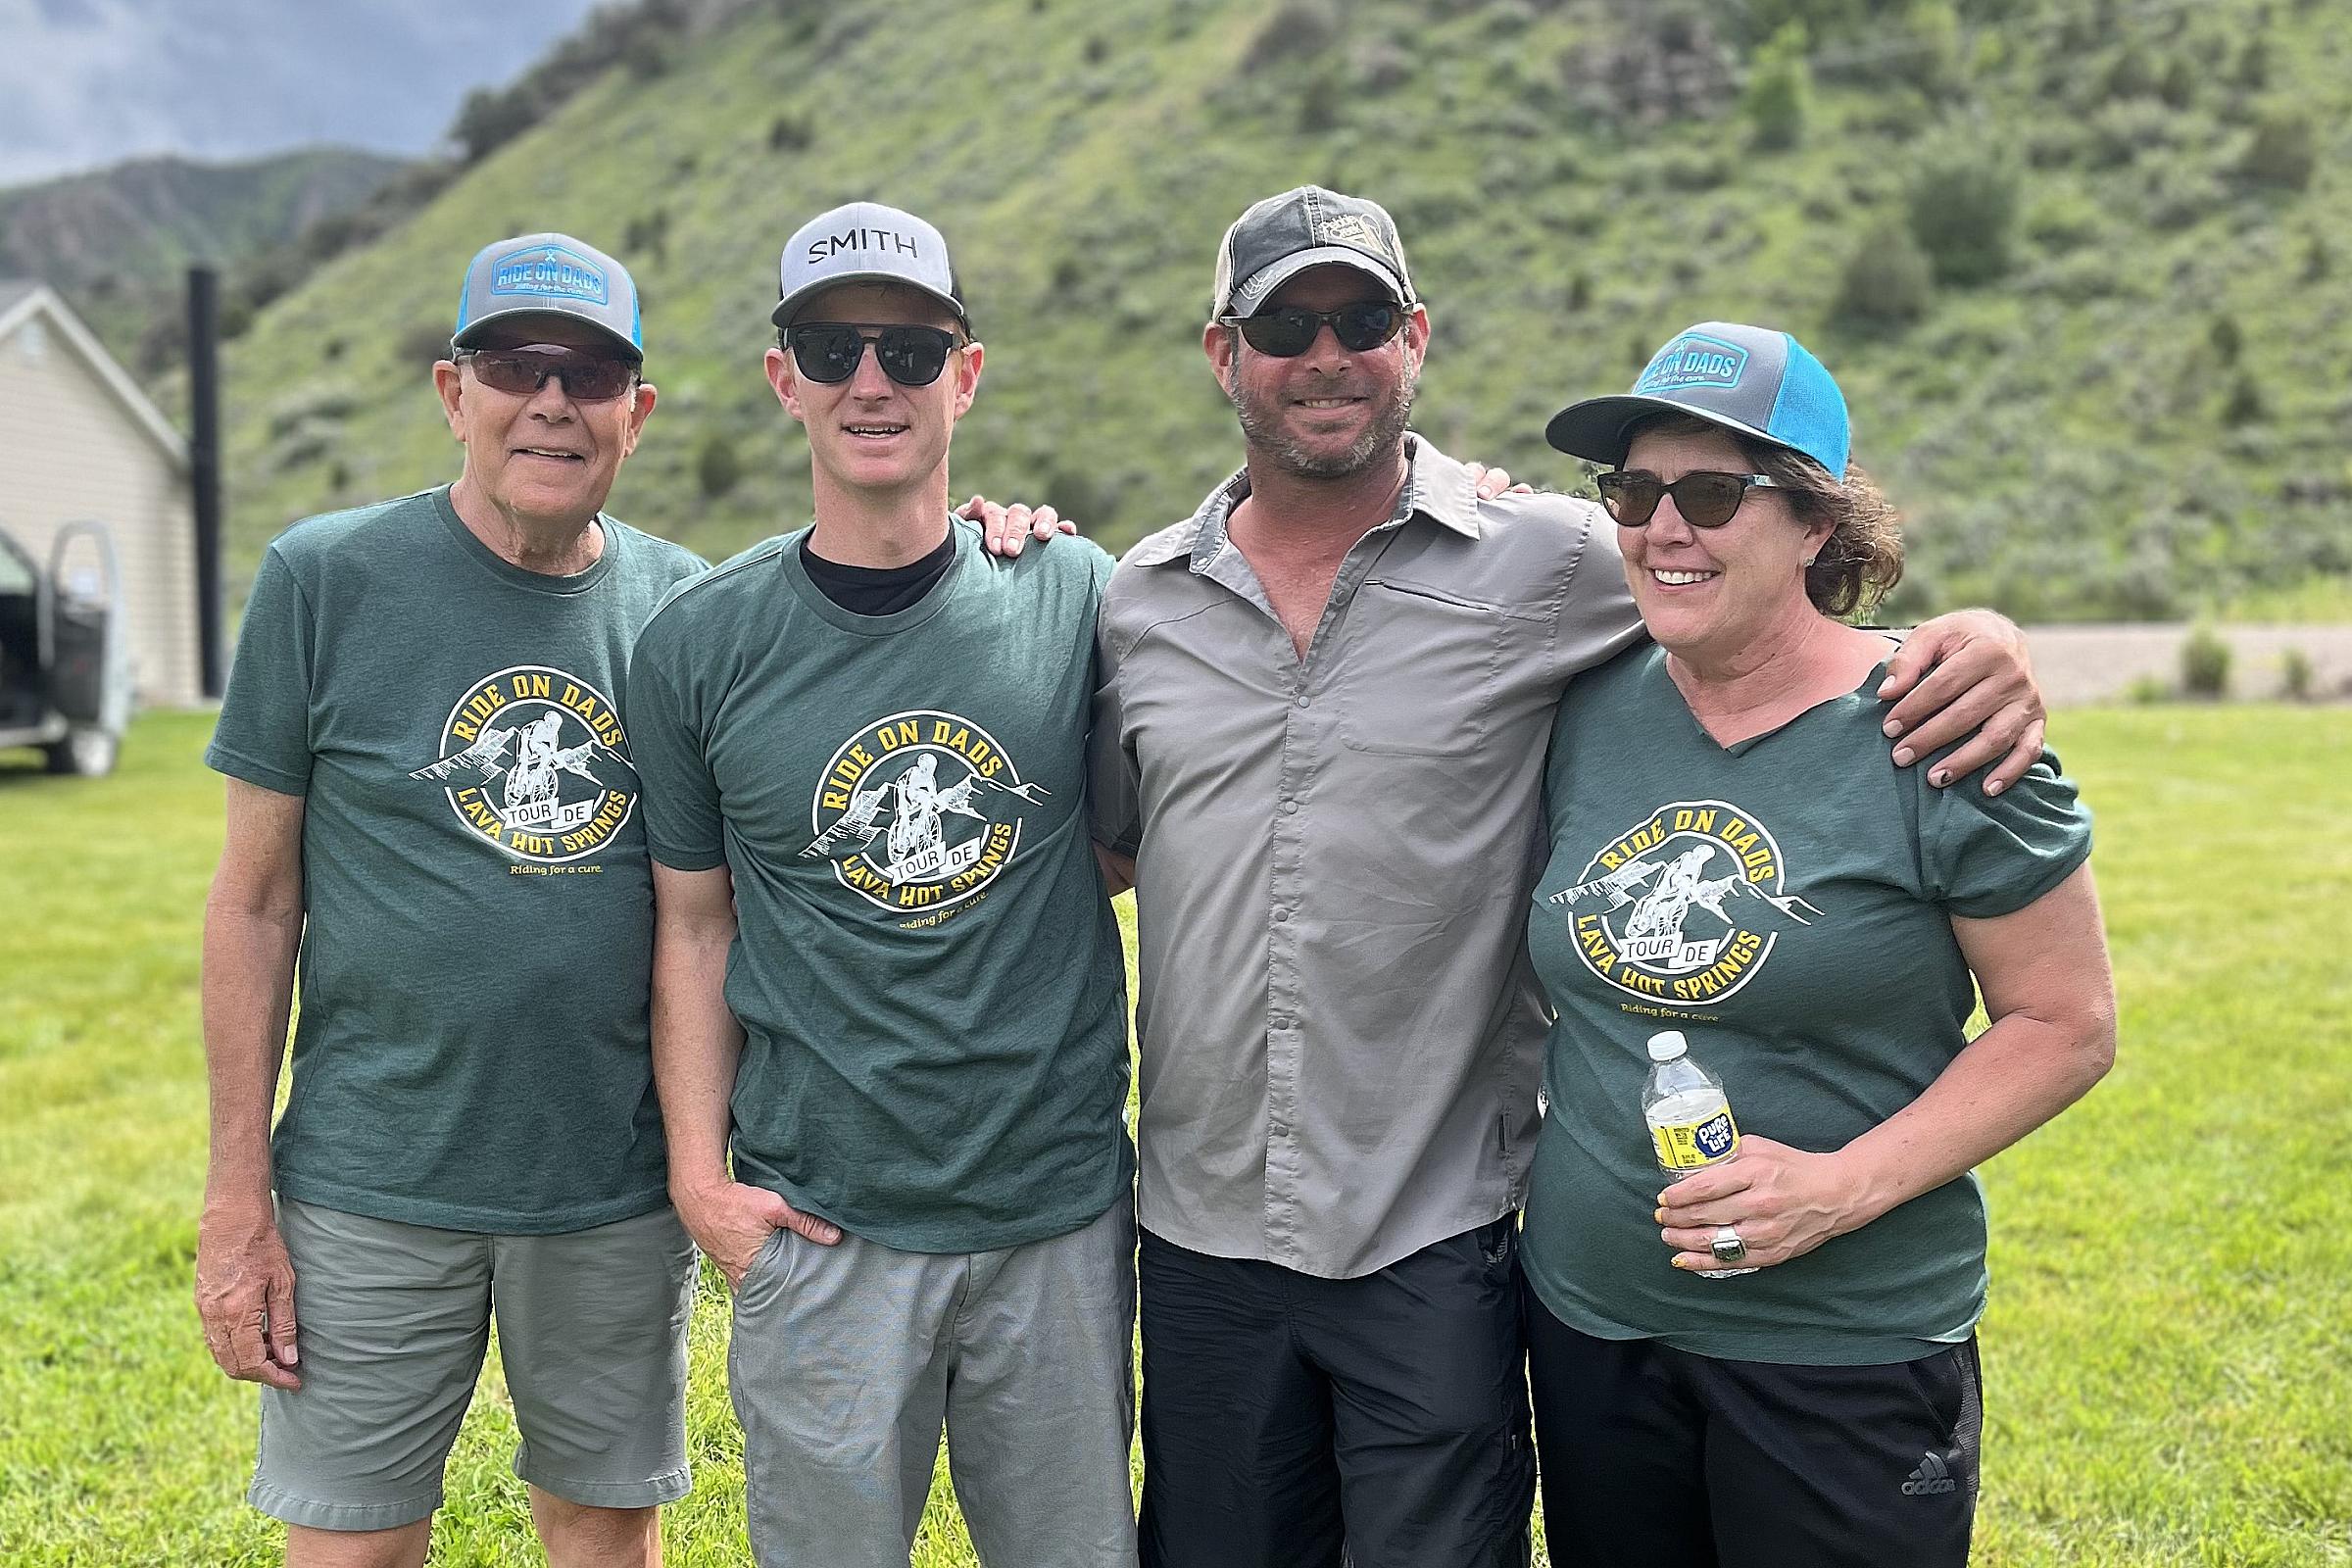 Zach and Tami Parris at Tour De Lava in June with representatives from sponsoring businesses: Jonathon Hunt of Barrie’s Ski and Sports and Mike Dixon of Pebble Creek Ski Area.